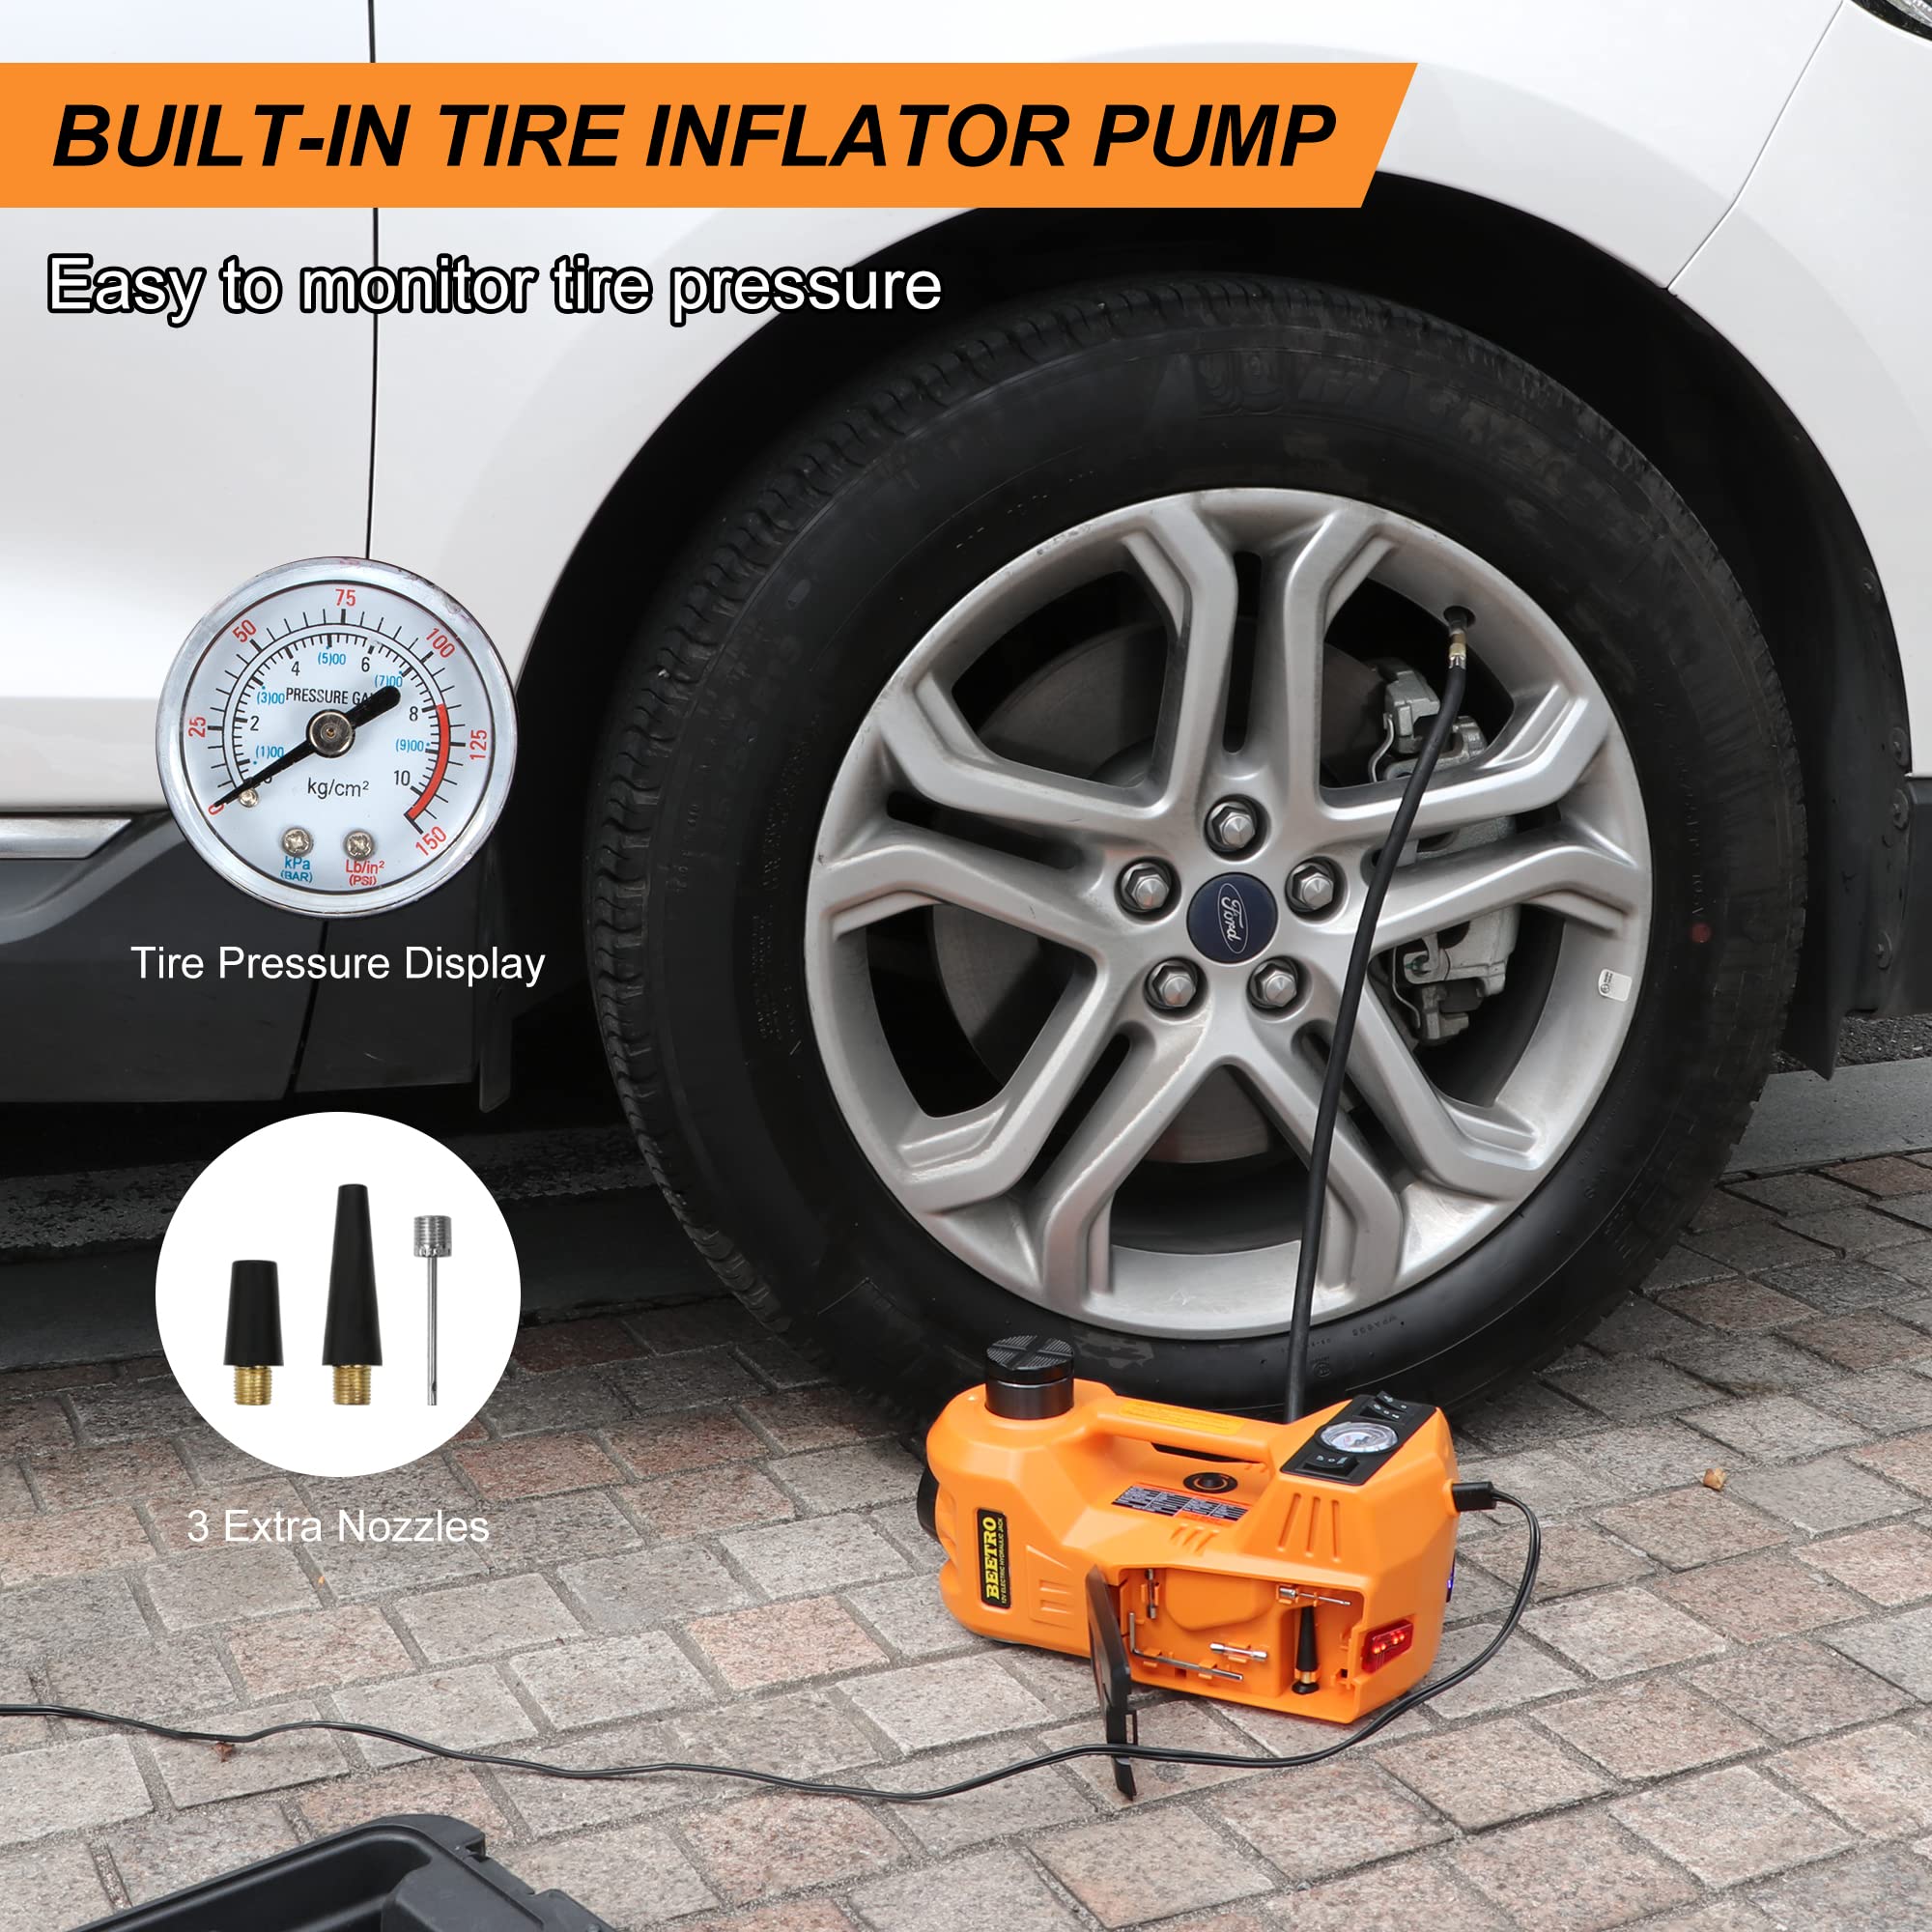 BEETRO Electric Car Jack Kit 5 Ton 12V with Electric Wrench and Tire Inflator Pump for SUV MPV Sedan Change Tires Garage Repair